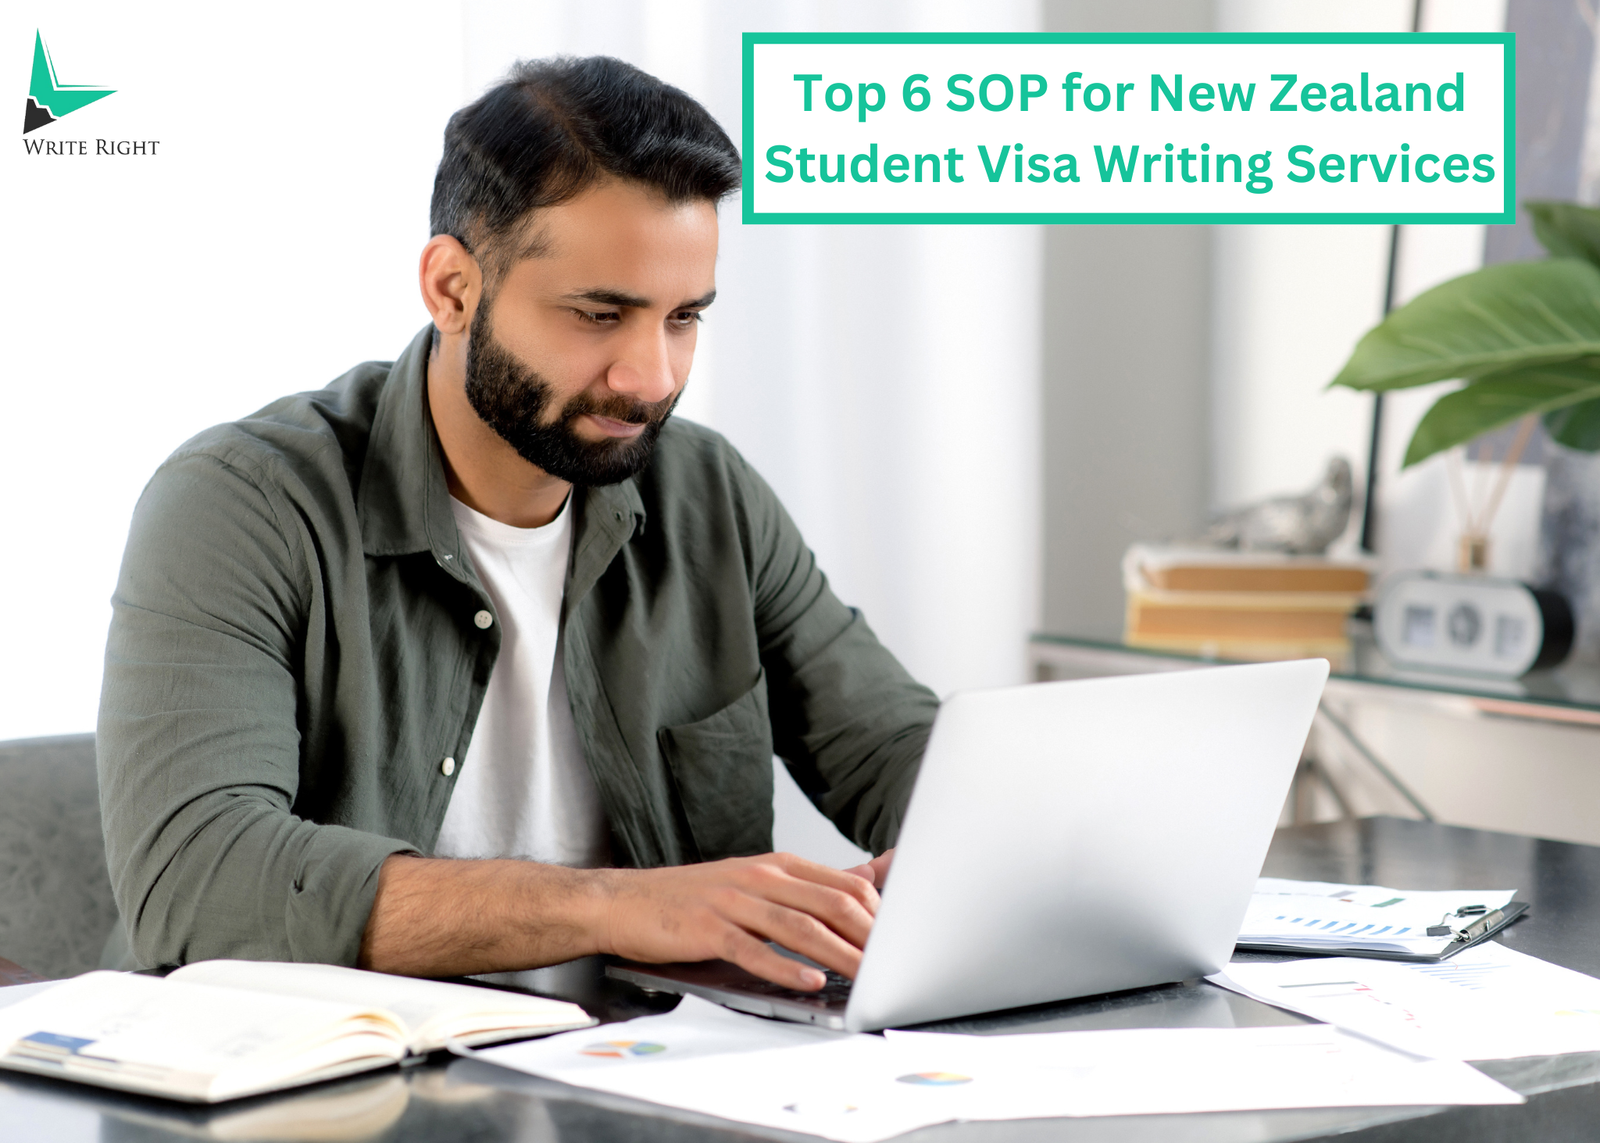 Top 6 SOP for New Zealand Student Visa Writing Services